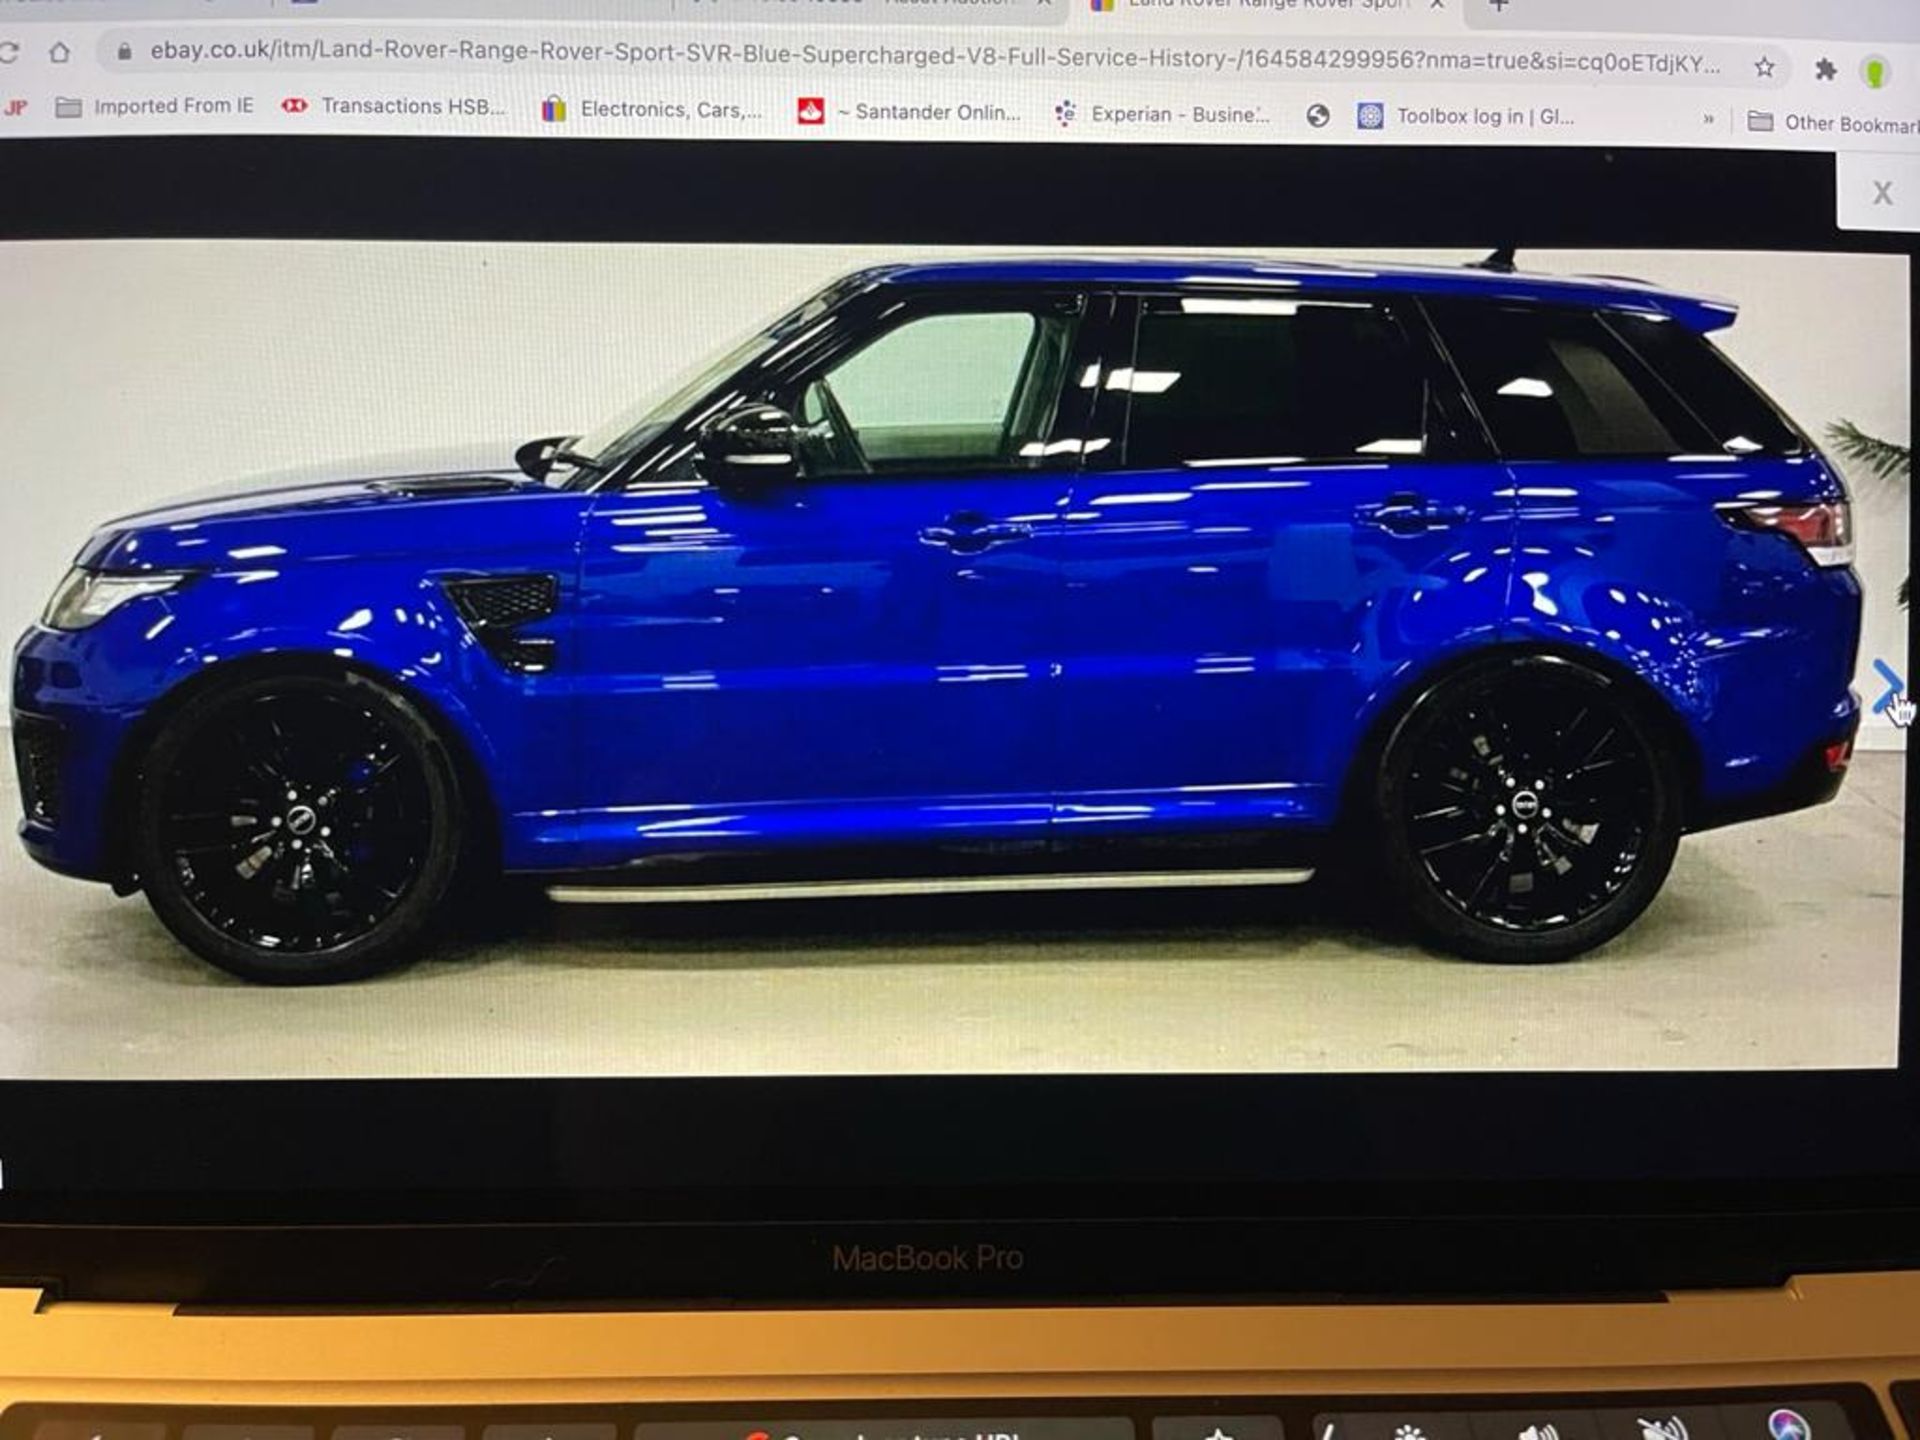 2016 RANGE ROVER SPORT SVR AUTOBIOGRAPHY DYNAMIC V8 SUPERCHARGED AUTOMATIC 5.0 550PS PETROL ENGINE - Image 14 of 28